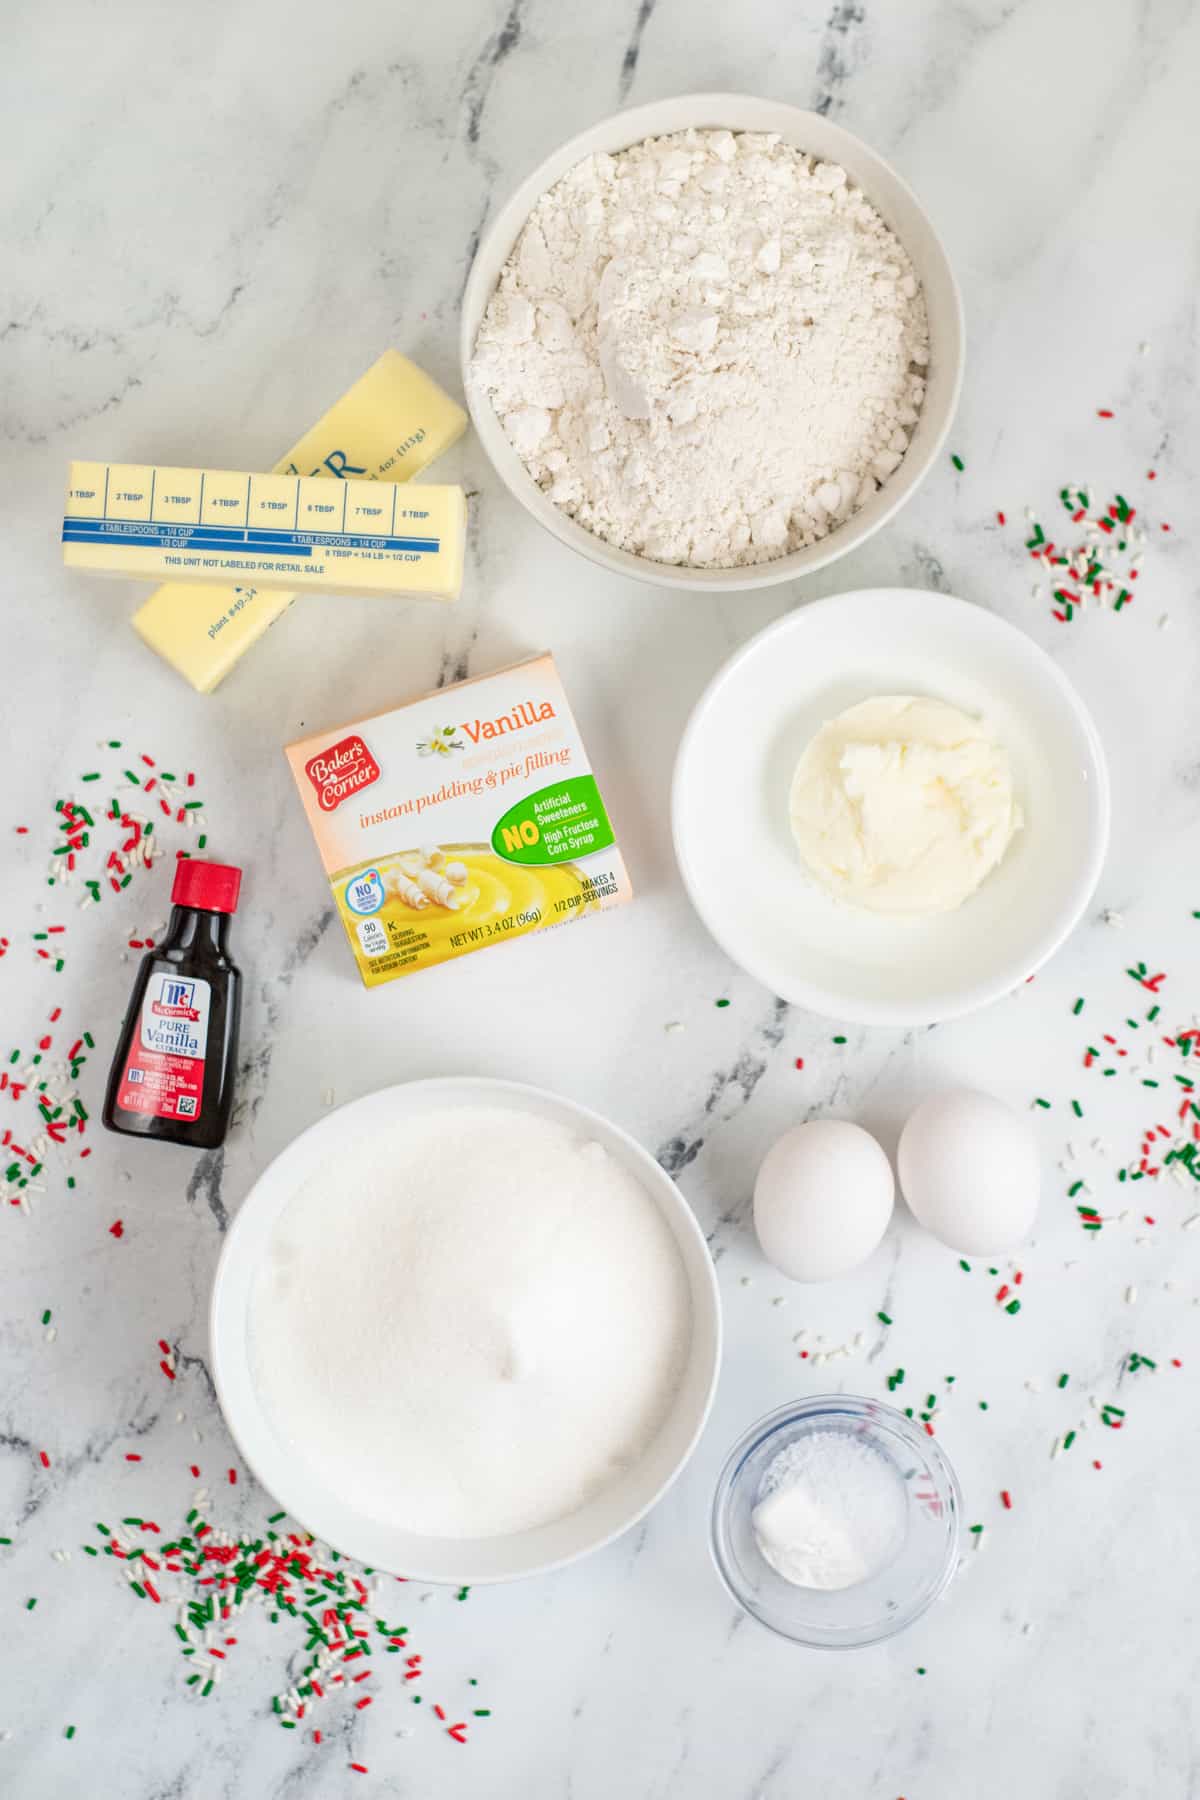 Two sticks of butter, bowl of flour, bowl of shortening, 2 eggs, box of vanilla pudding mix, bowl of granulated sugar, baking powder, bottle of vanilla, and red, white, and green sprinkles scatted all around